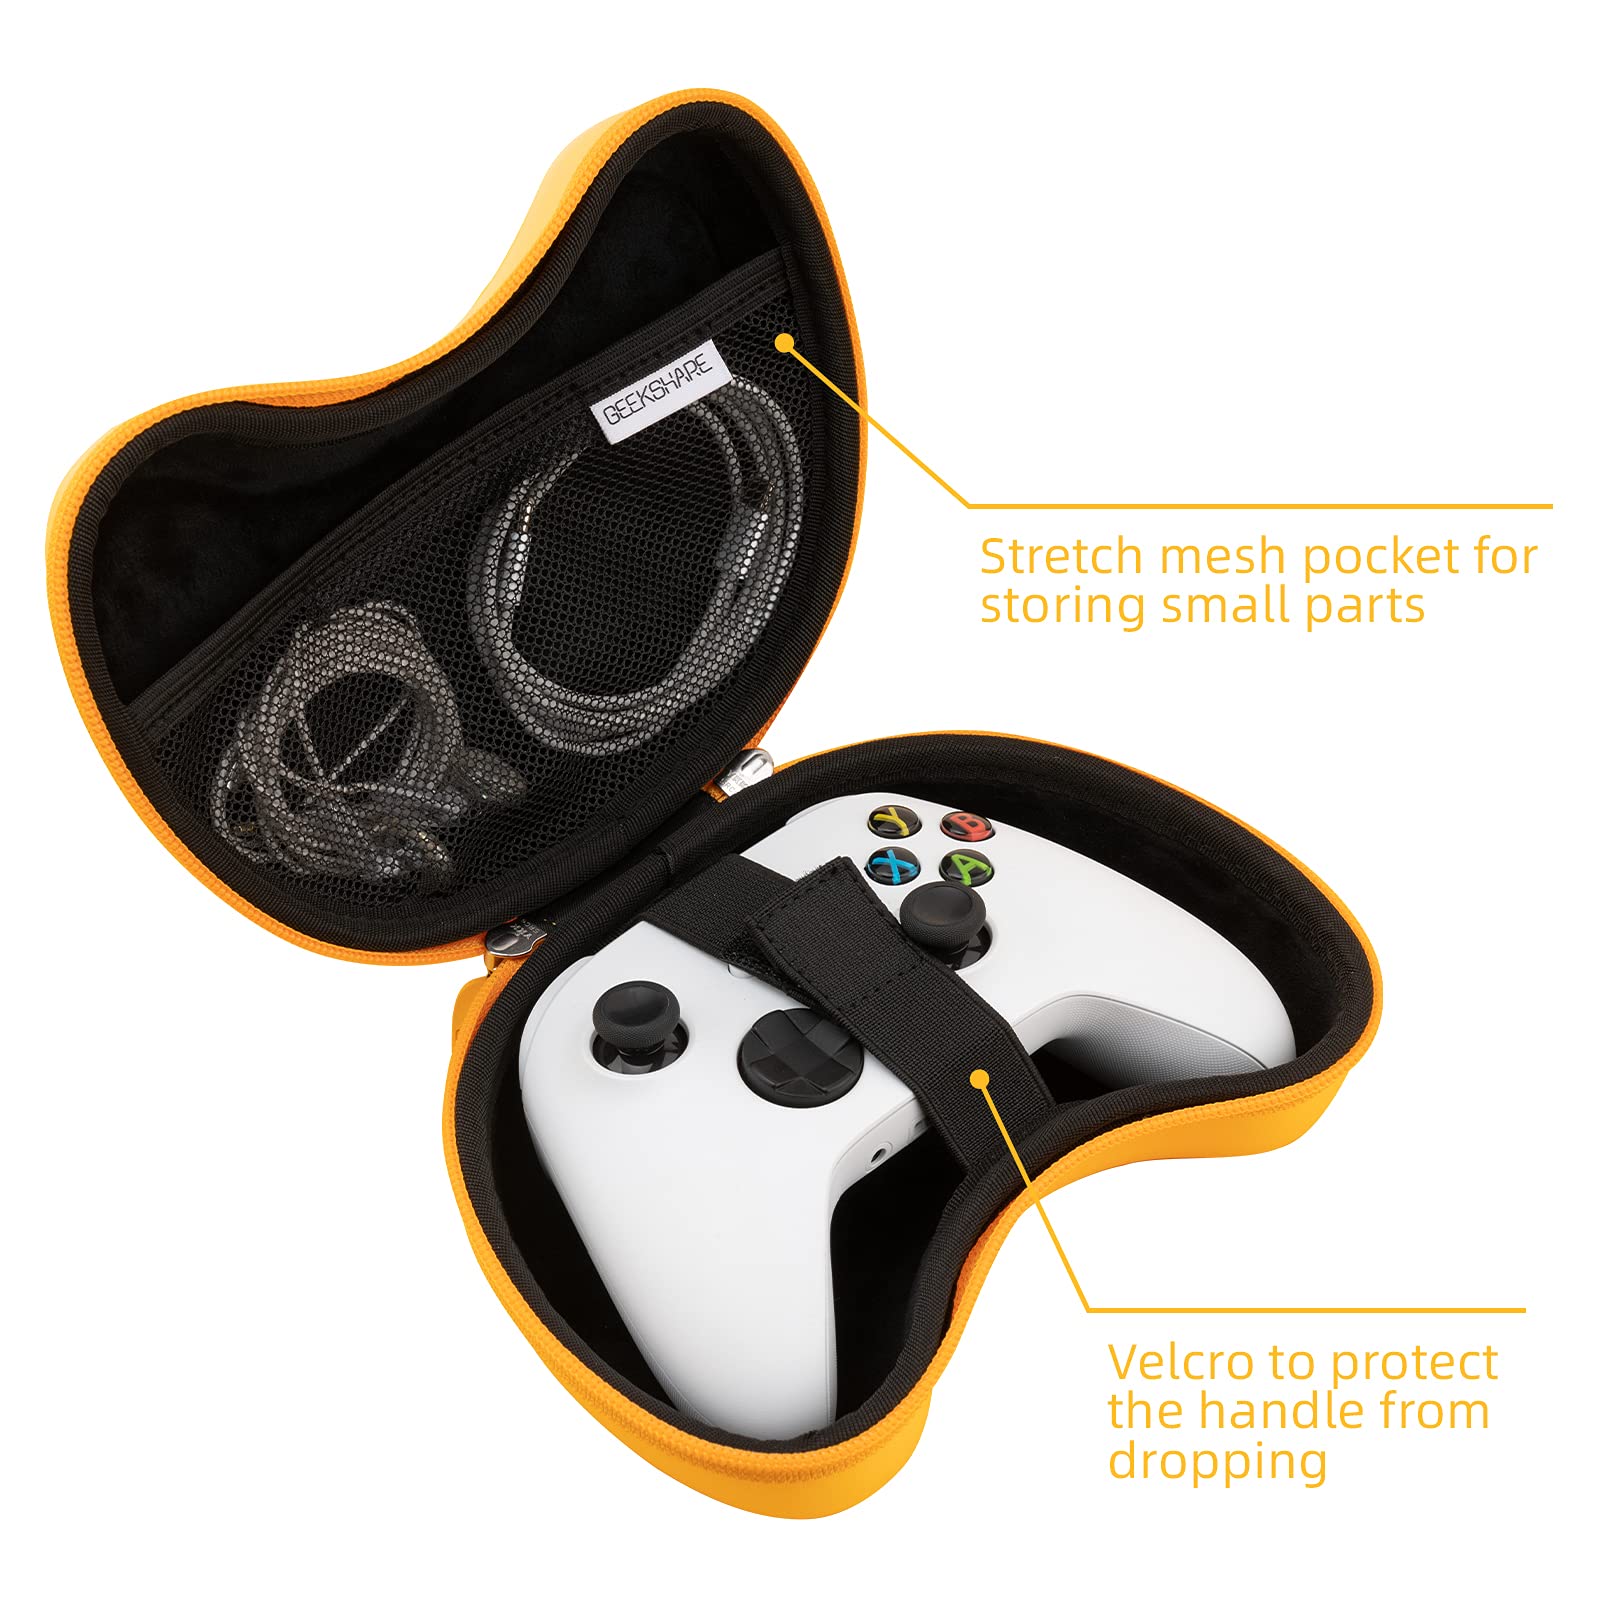 GeekShare Cute Corgi PS5 Gaming Controller Case-Controller Holder Hard Shell Travel Carrying Case for Playstation 5, PS4, NS Pro, Xbox with Room for Cable Cord and Accessories